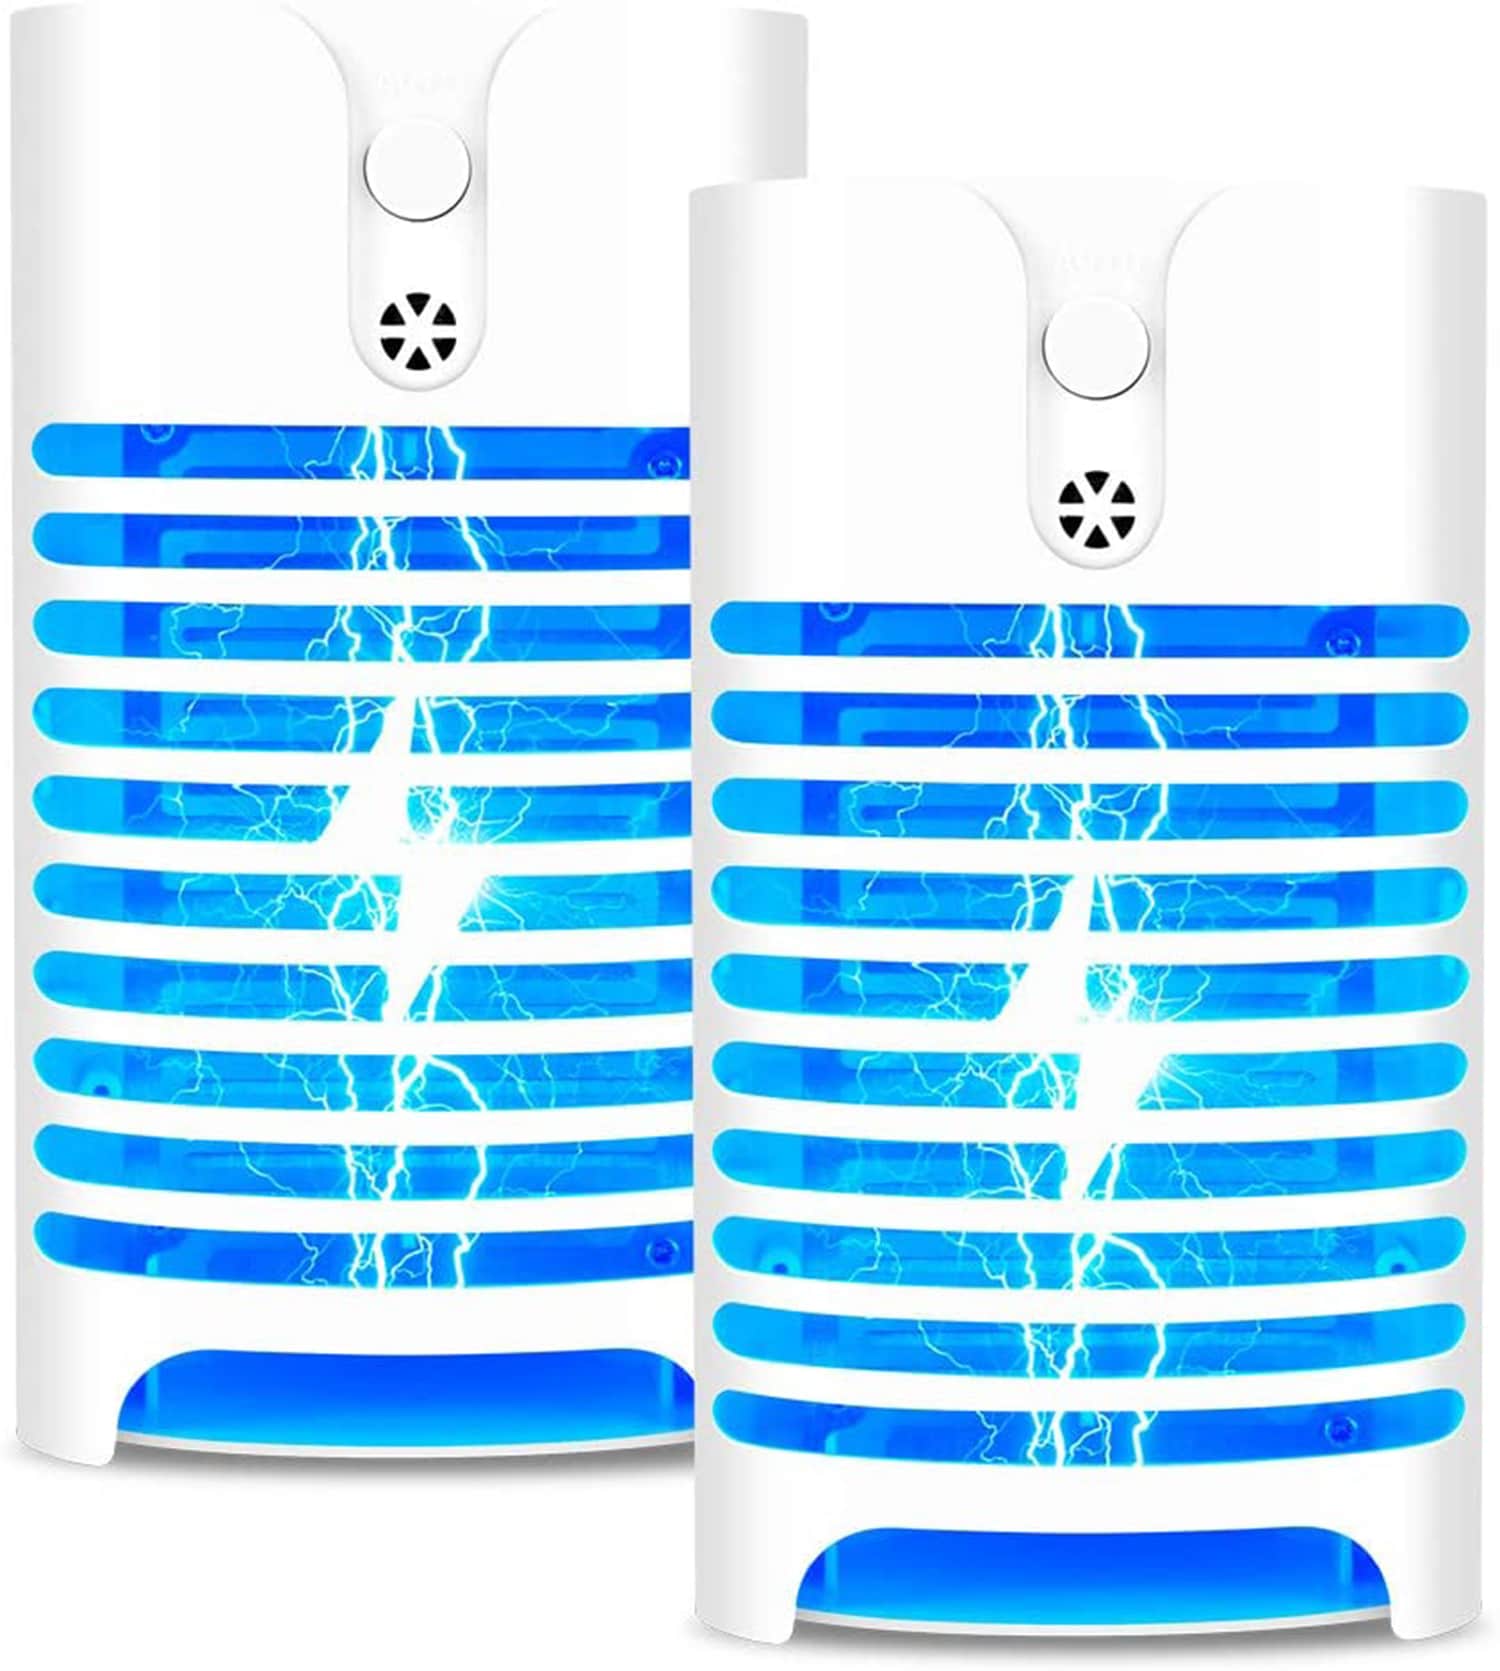 Bug Zapper Silent Mosquito Killer Fruit Fly Traps For Indoors,indoor  Plug-in Fly Trap For Flies, Fruit Flies, Eu Plug(white)